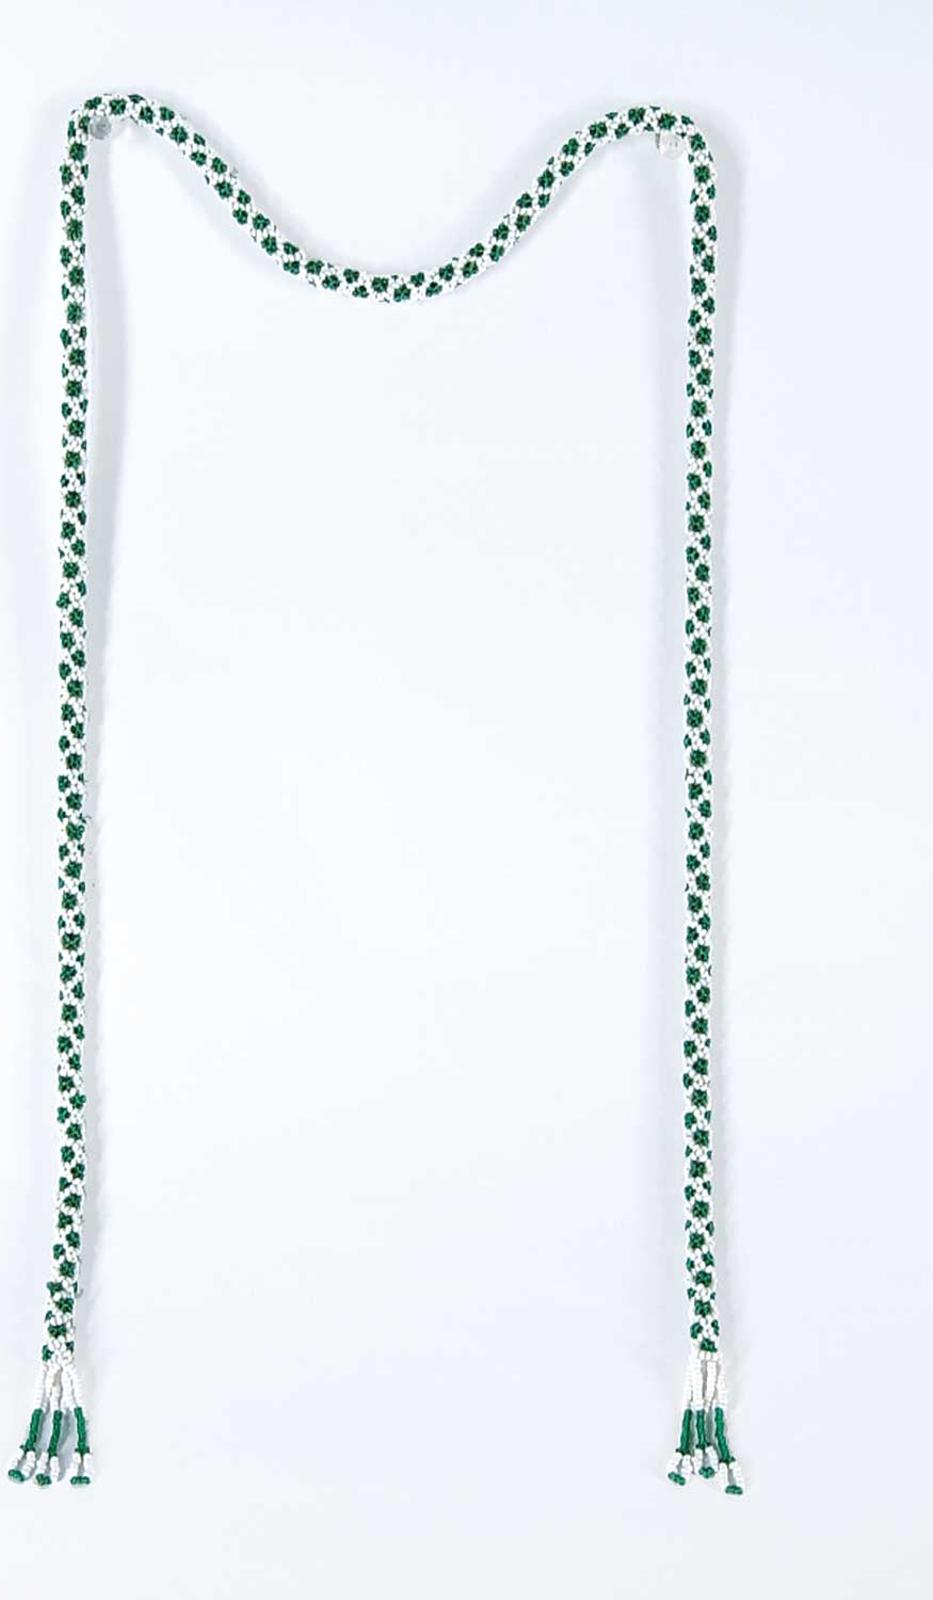 Robert Charles Aller (1922-2008) - Untitled - Green and White Rope Necklace [No Bolo]